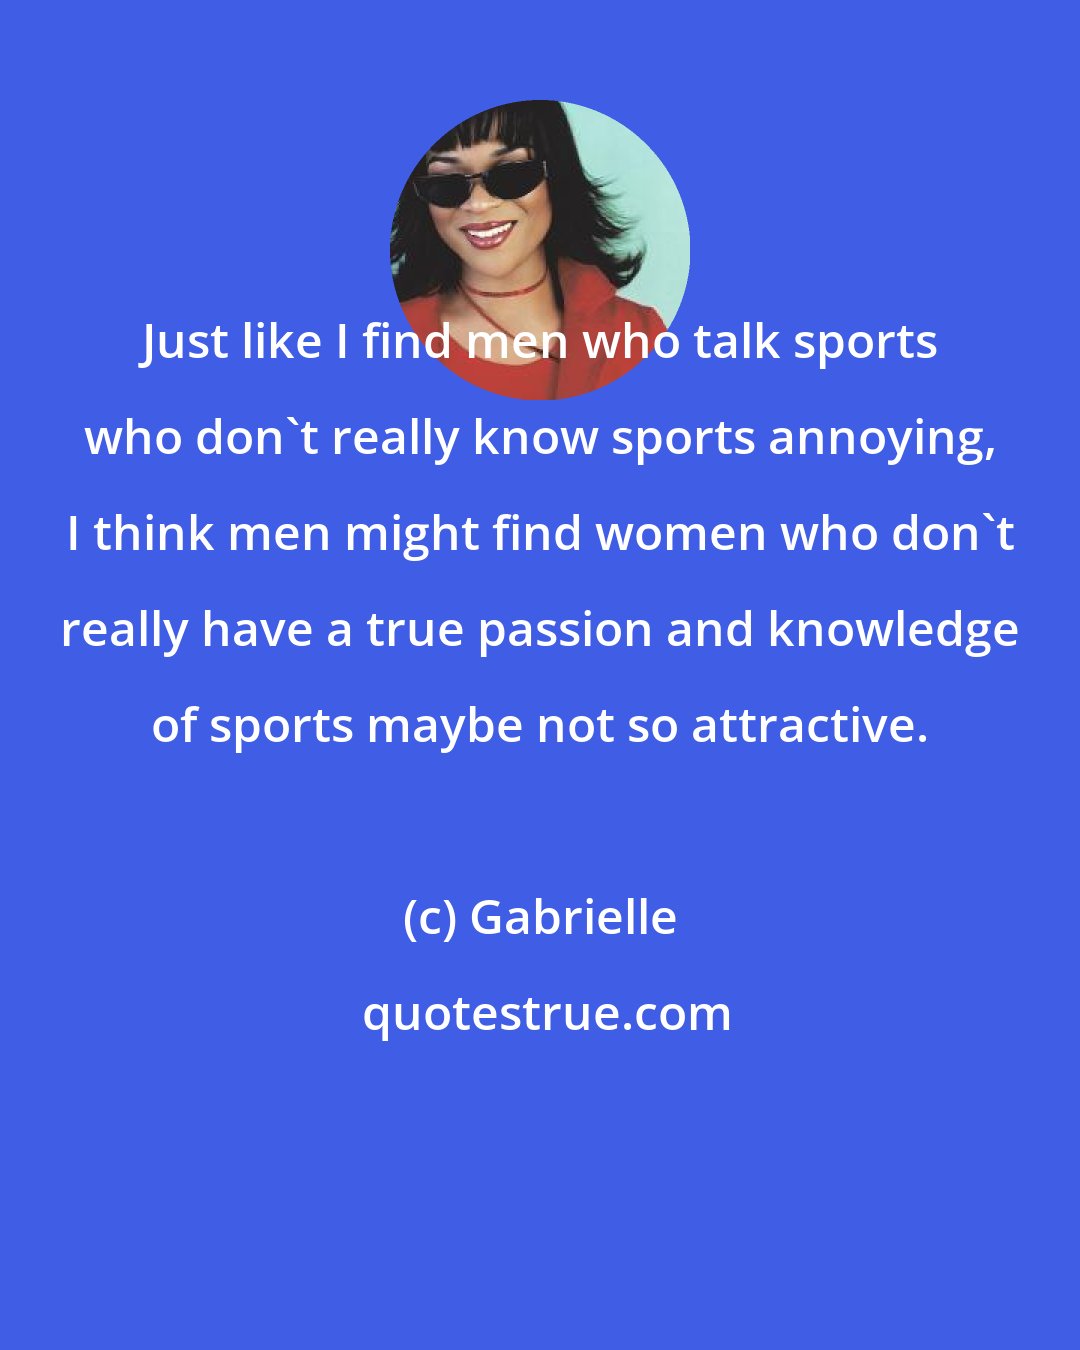 Gabrielle: Just like I find men who talk sports who don't really know sports annoying, I think men might find women who don't really have a true passion and knowledge of sports maybe not so attractive.